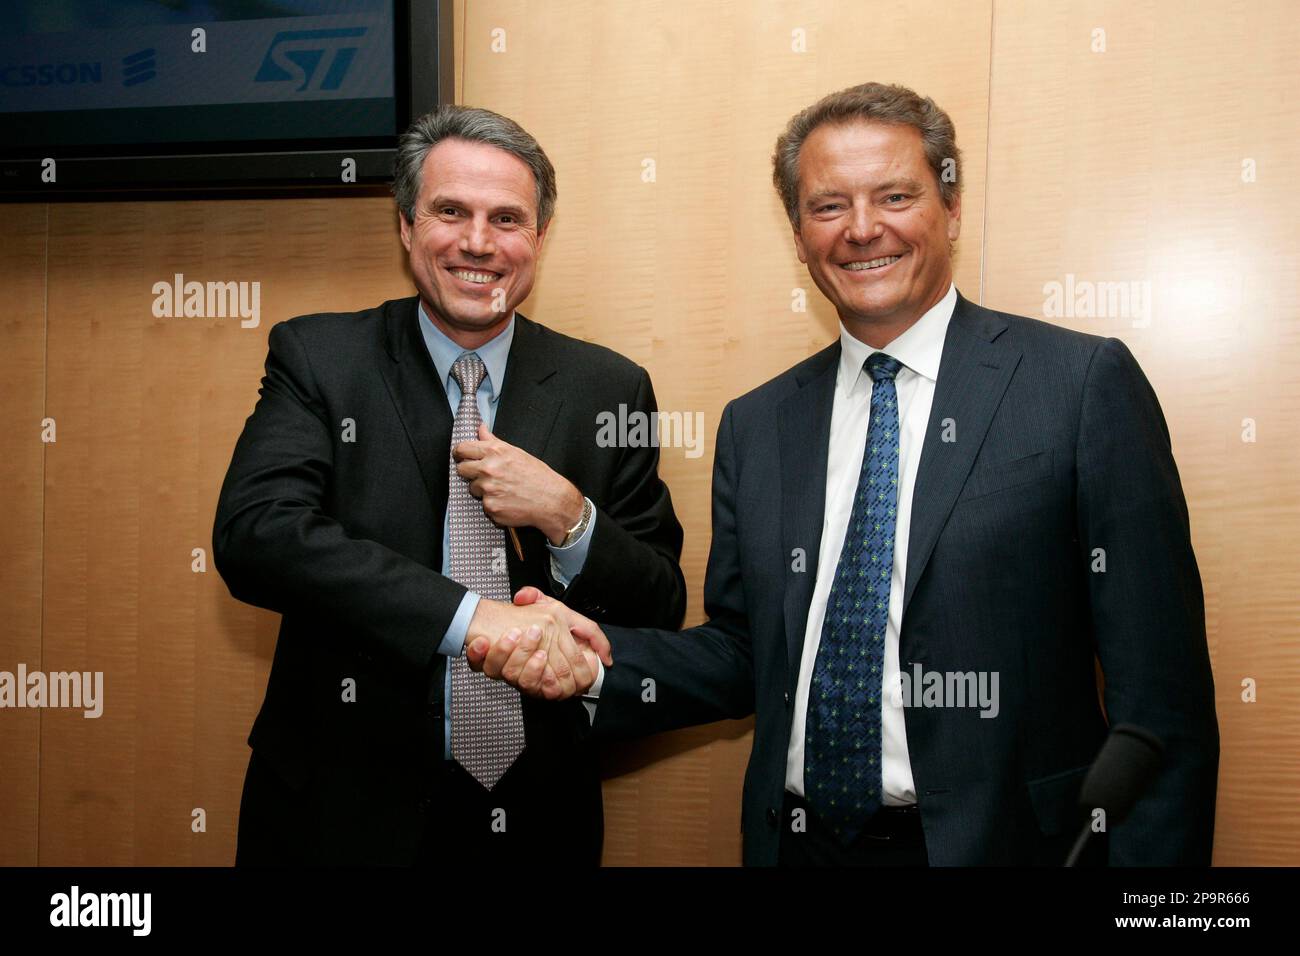 Carlo Bozotti, President and CEO of STMicroelectronics, left, and Carl-Henric Svanberg, President and CEO of Ericsson, right, shake hands after their joint conference to the media and business analysts to announce an agreement to merge Ericsson Mobile Platforms and ST-NXP Wireless into a 50/50 joint venture, in London, Wednesday, Aug. 20, 2008. (AP Photo/Sang Tan) Stock Photo